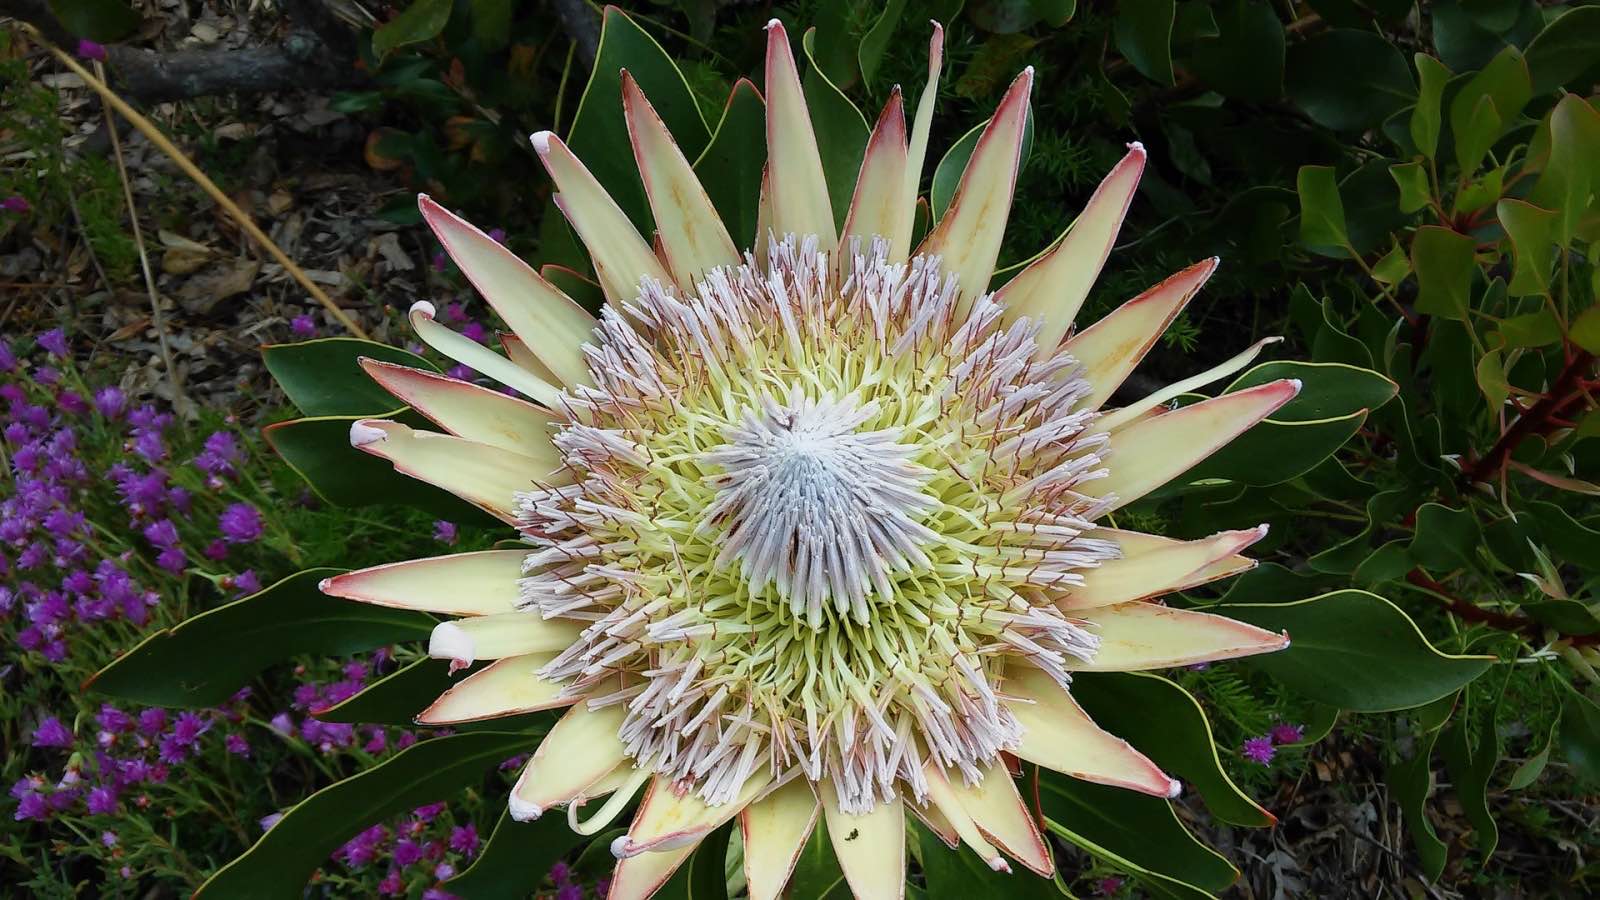 A king protea - South Africa's national flower